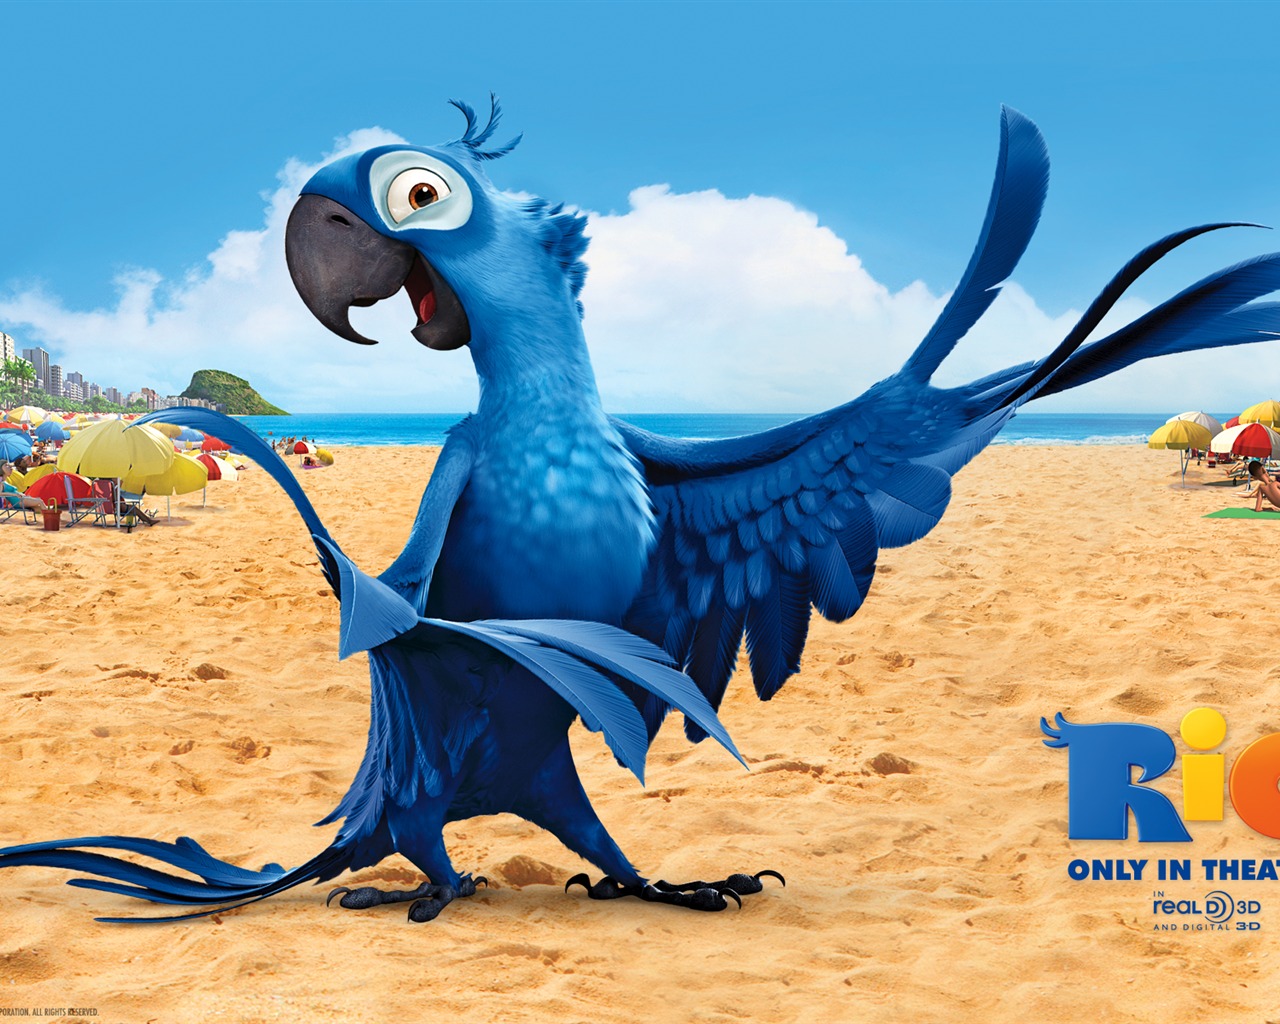 Rio 2011 wallpapers #2 - 1280x1024